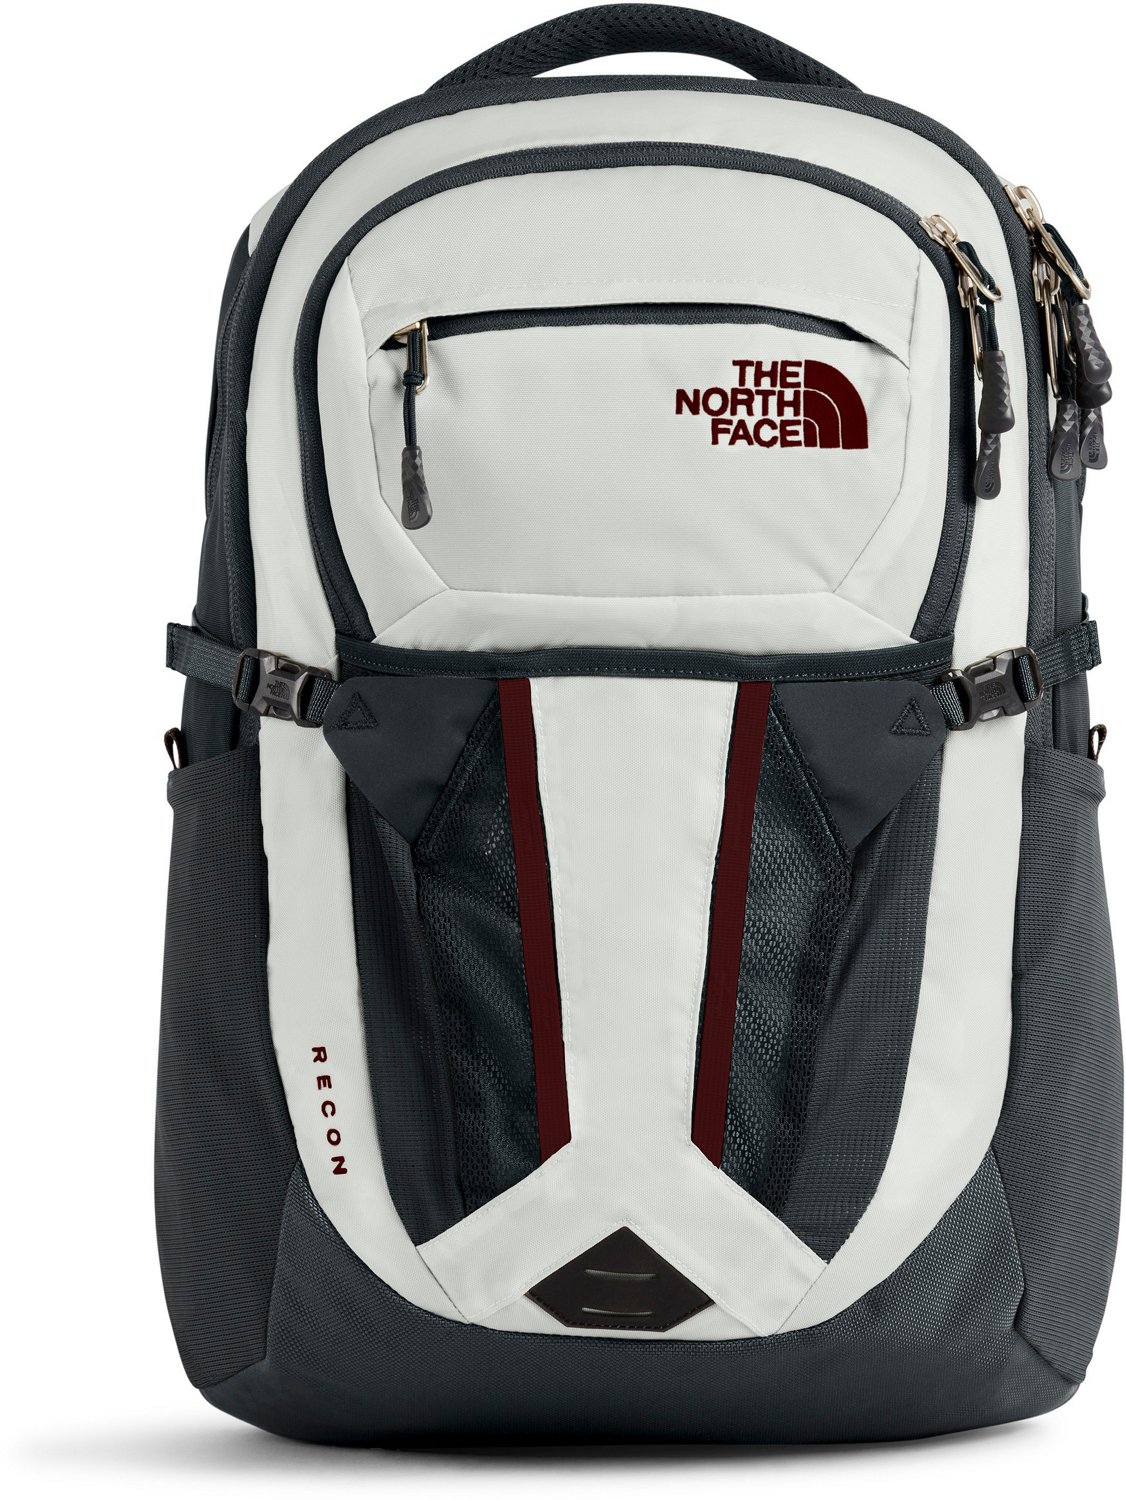 The North Face Backpacks | Academy